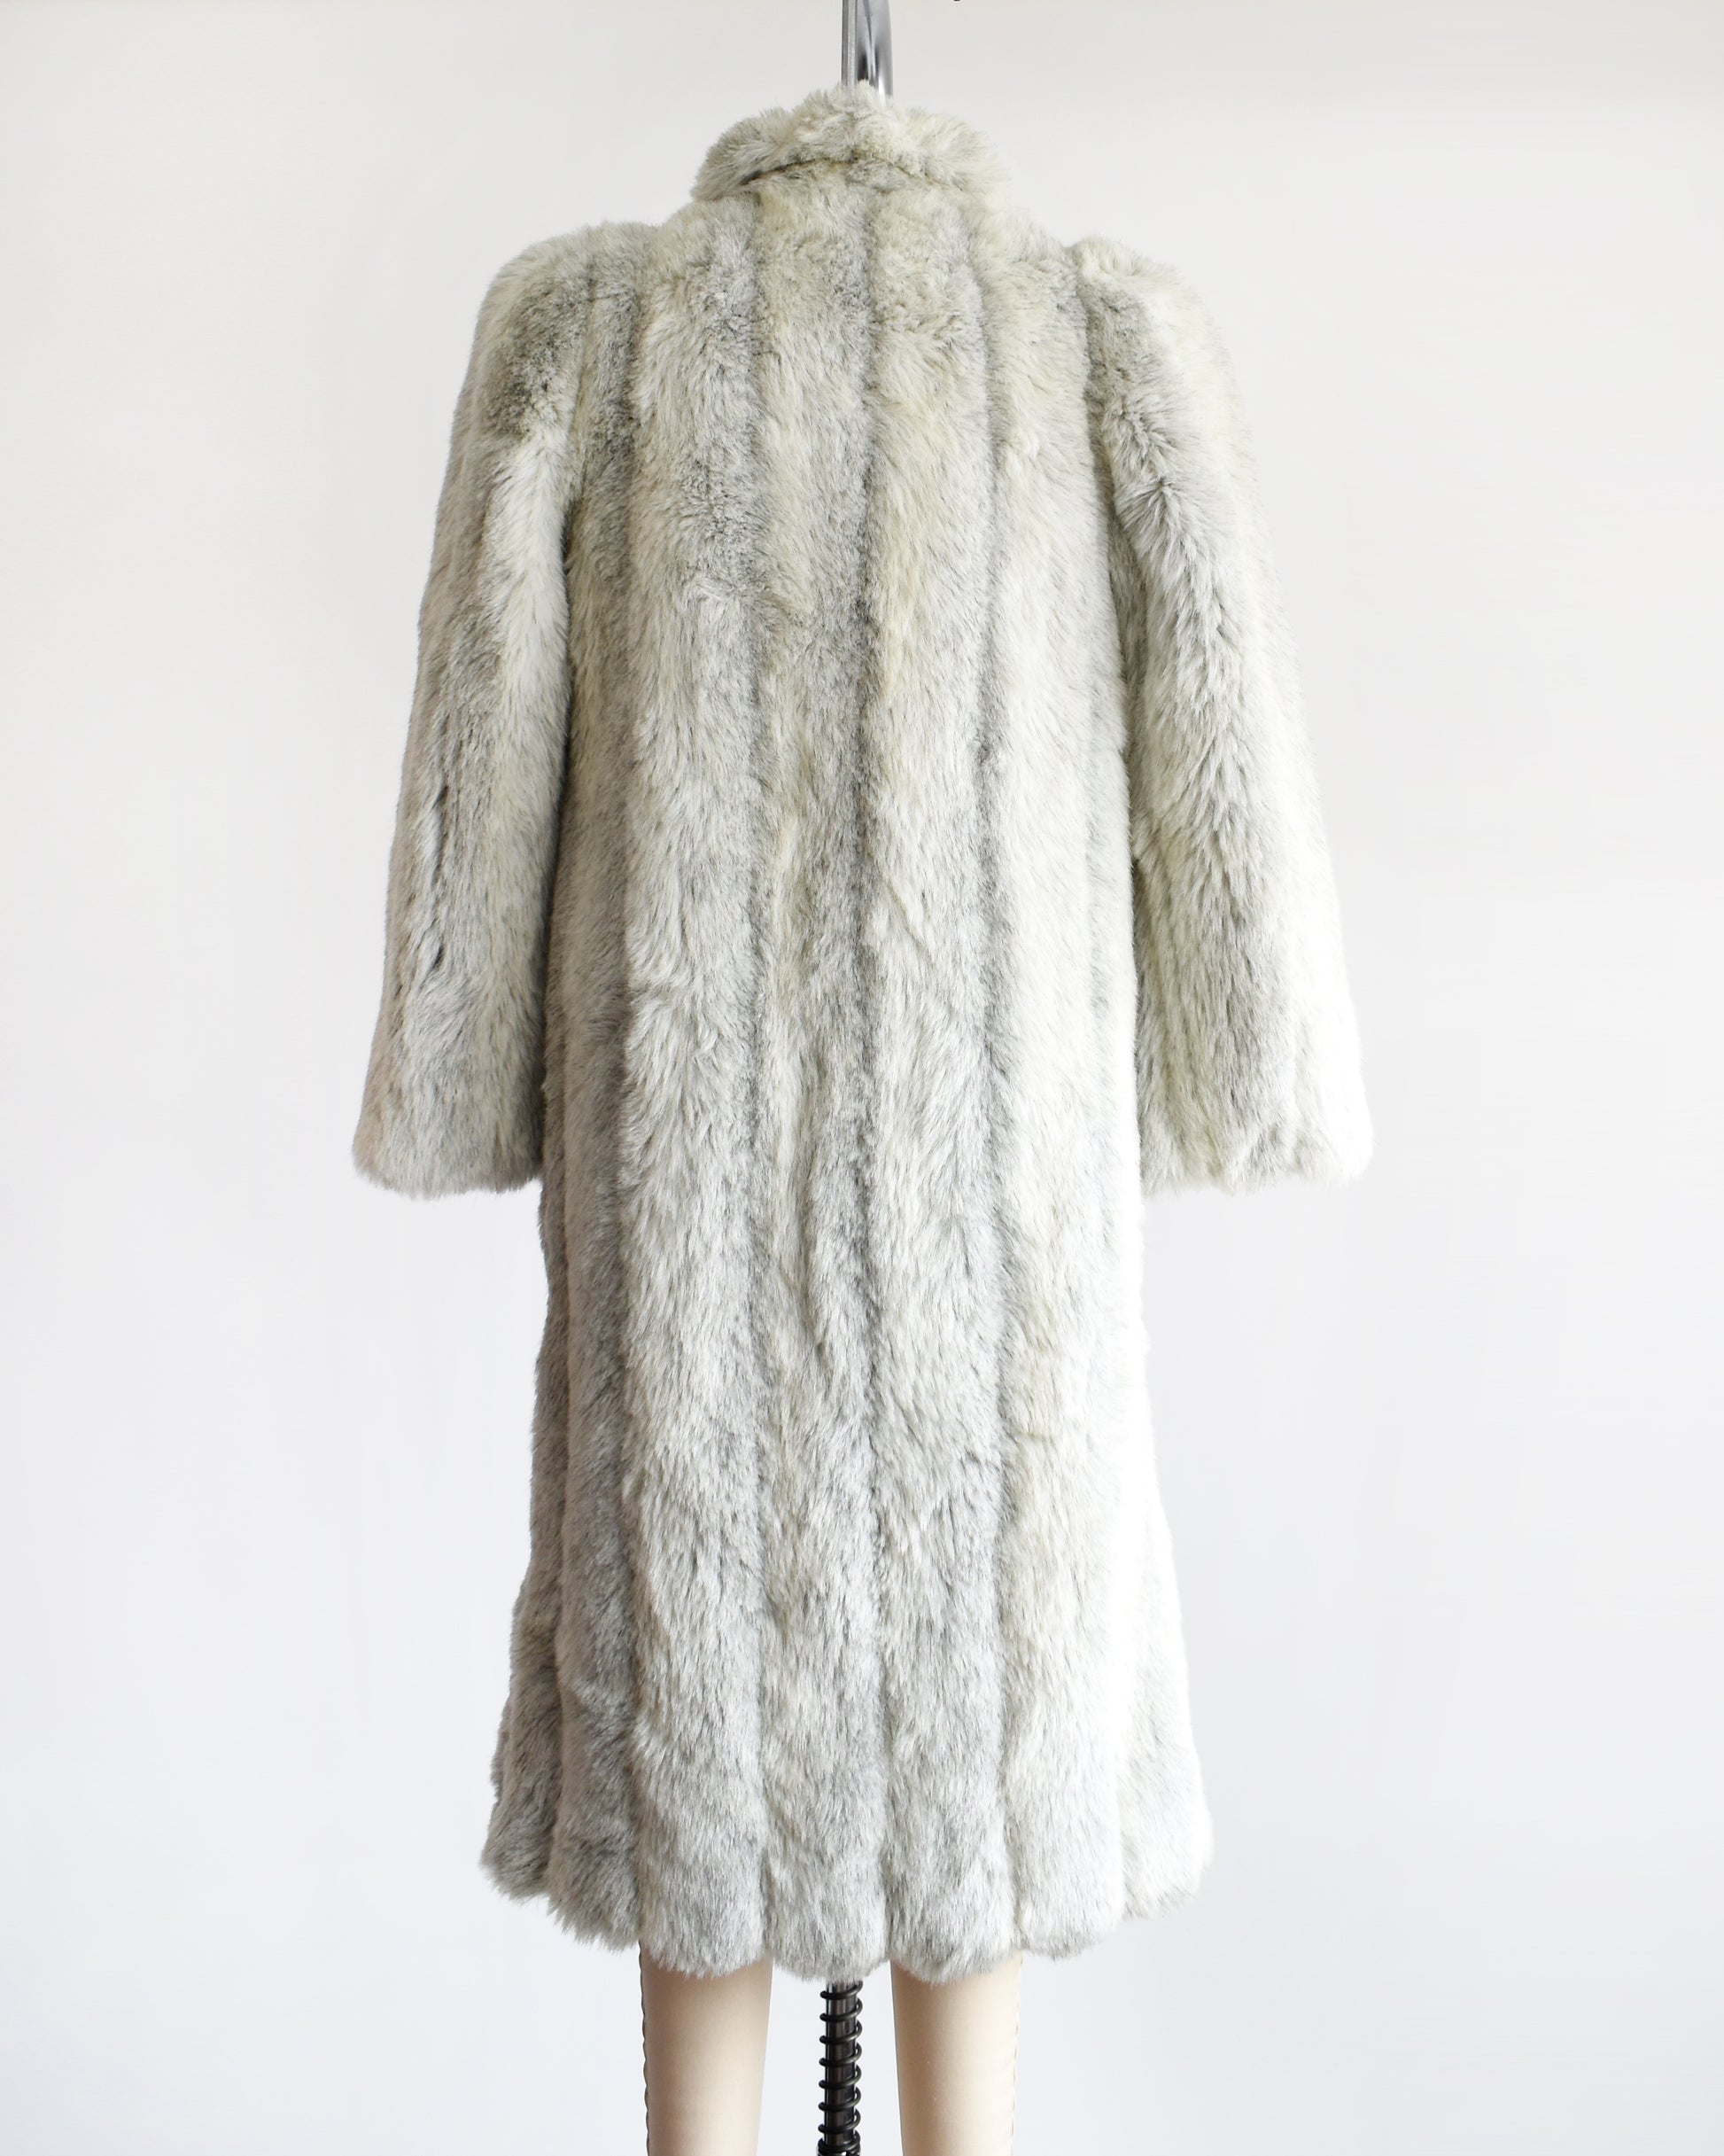 Back view of a vintage 1980s  cream colored faux fur coat with light and dark gray stripes. 